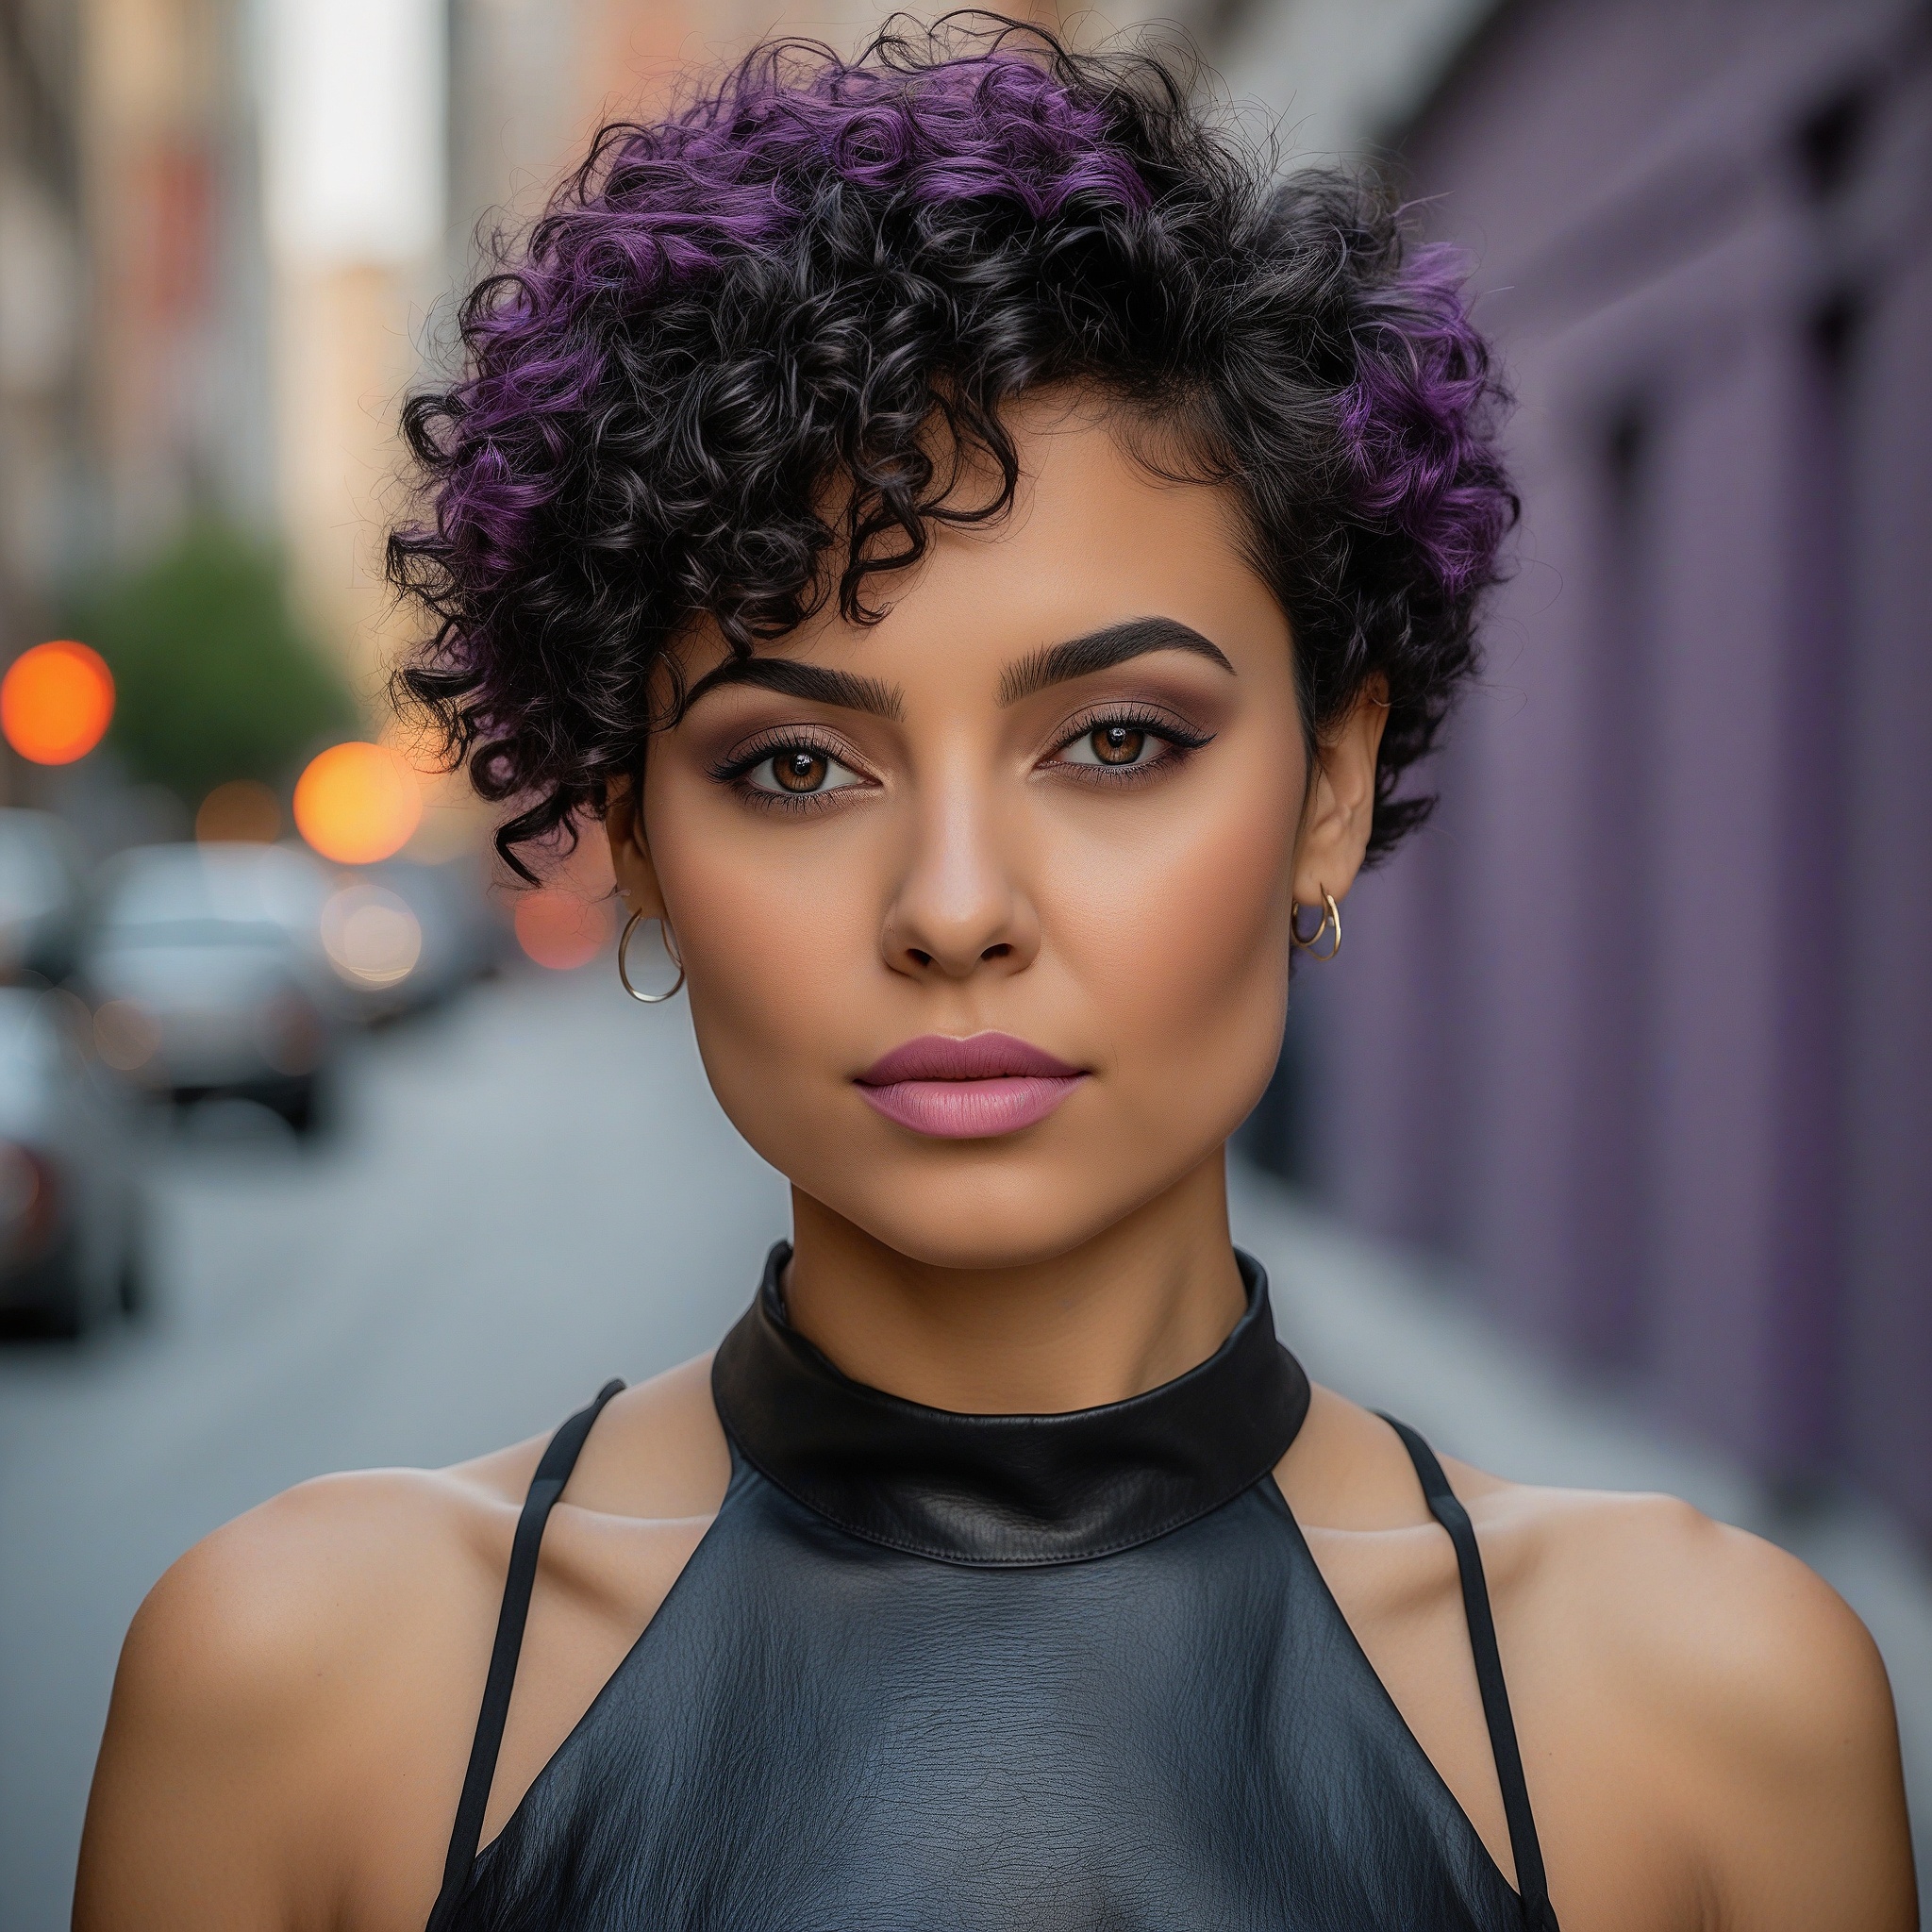 Curly Styled Pixie With Purple Highlights